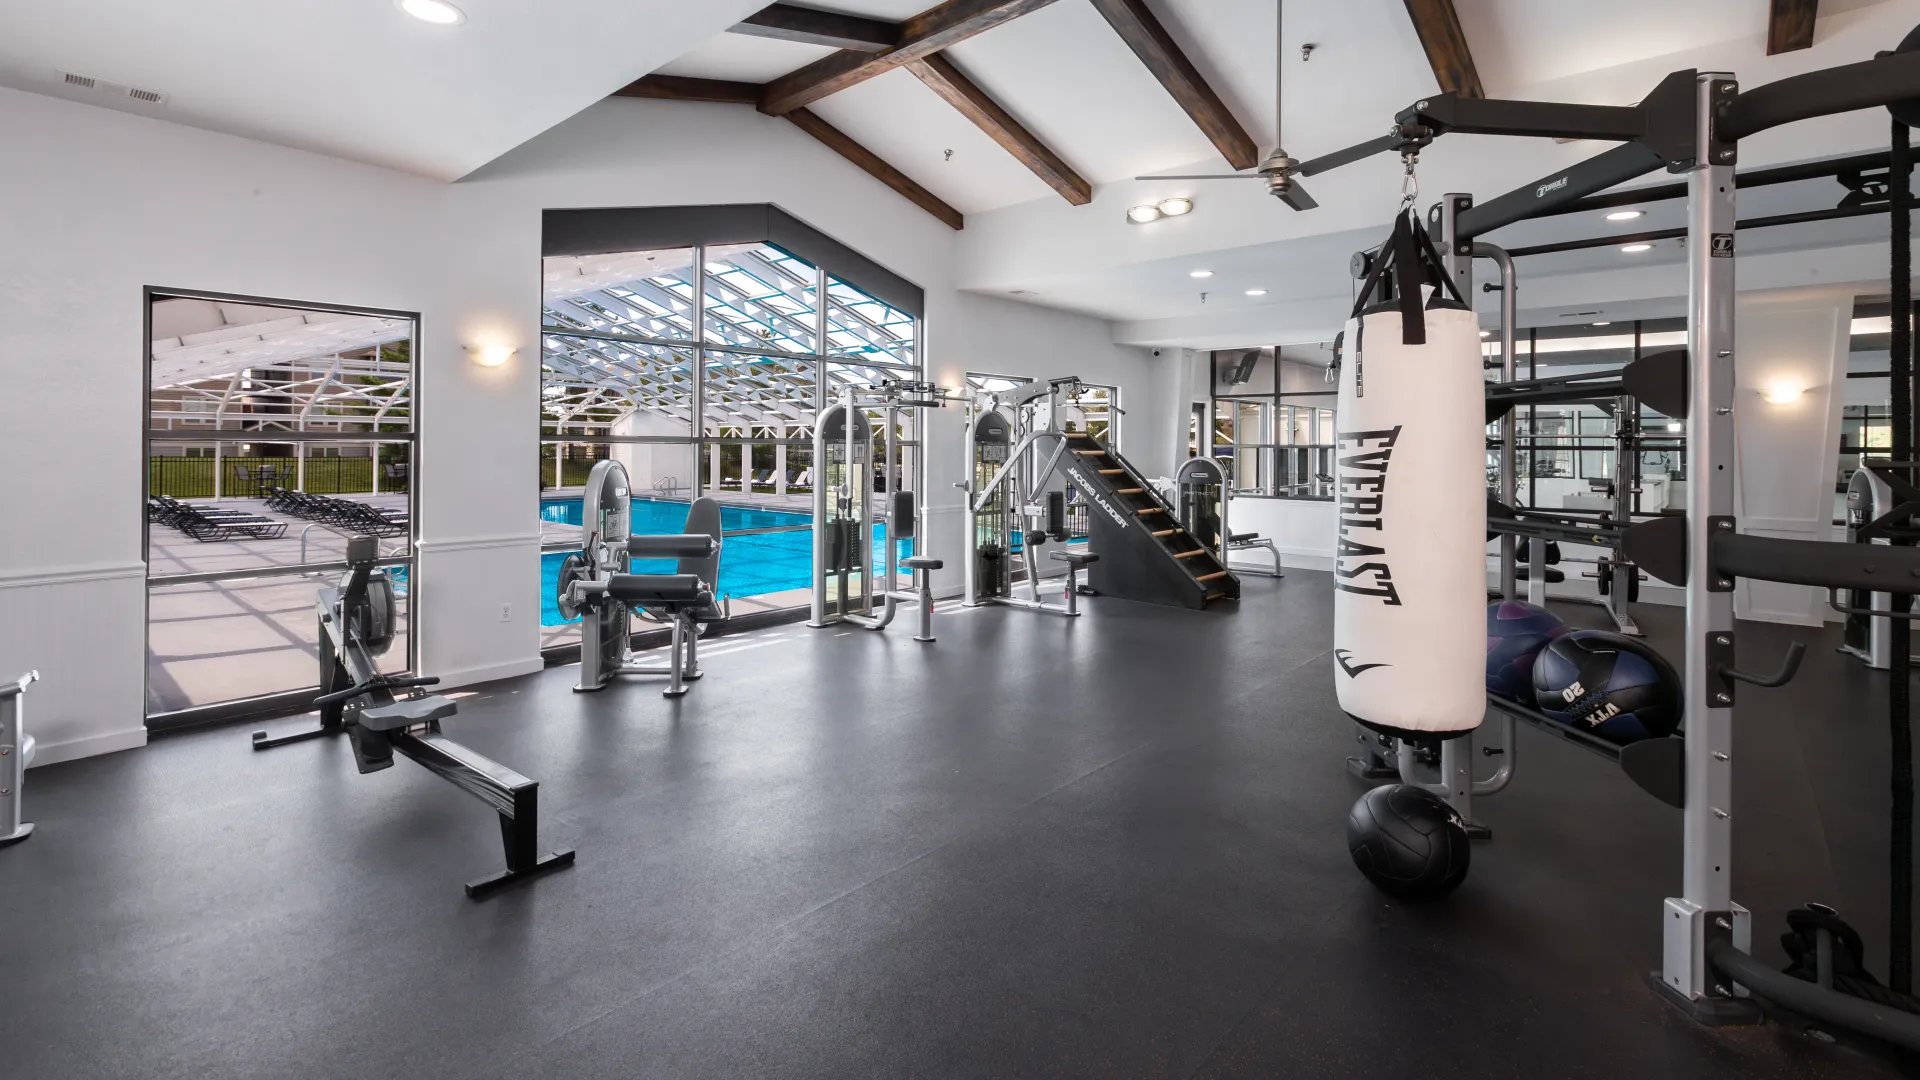 Fitness center featuring a variety of workout equipment, including a punching bag, weight machines, and cardio machines, with large windows offering a view of the indoor pool.